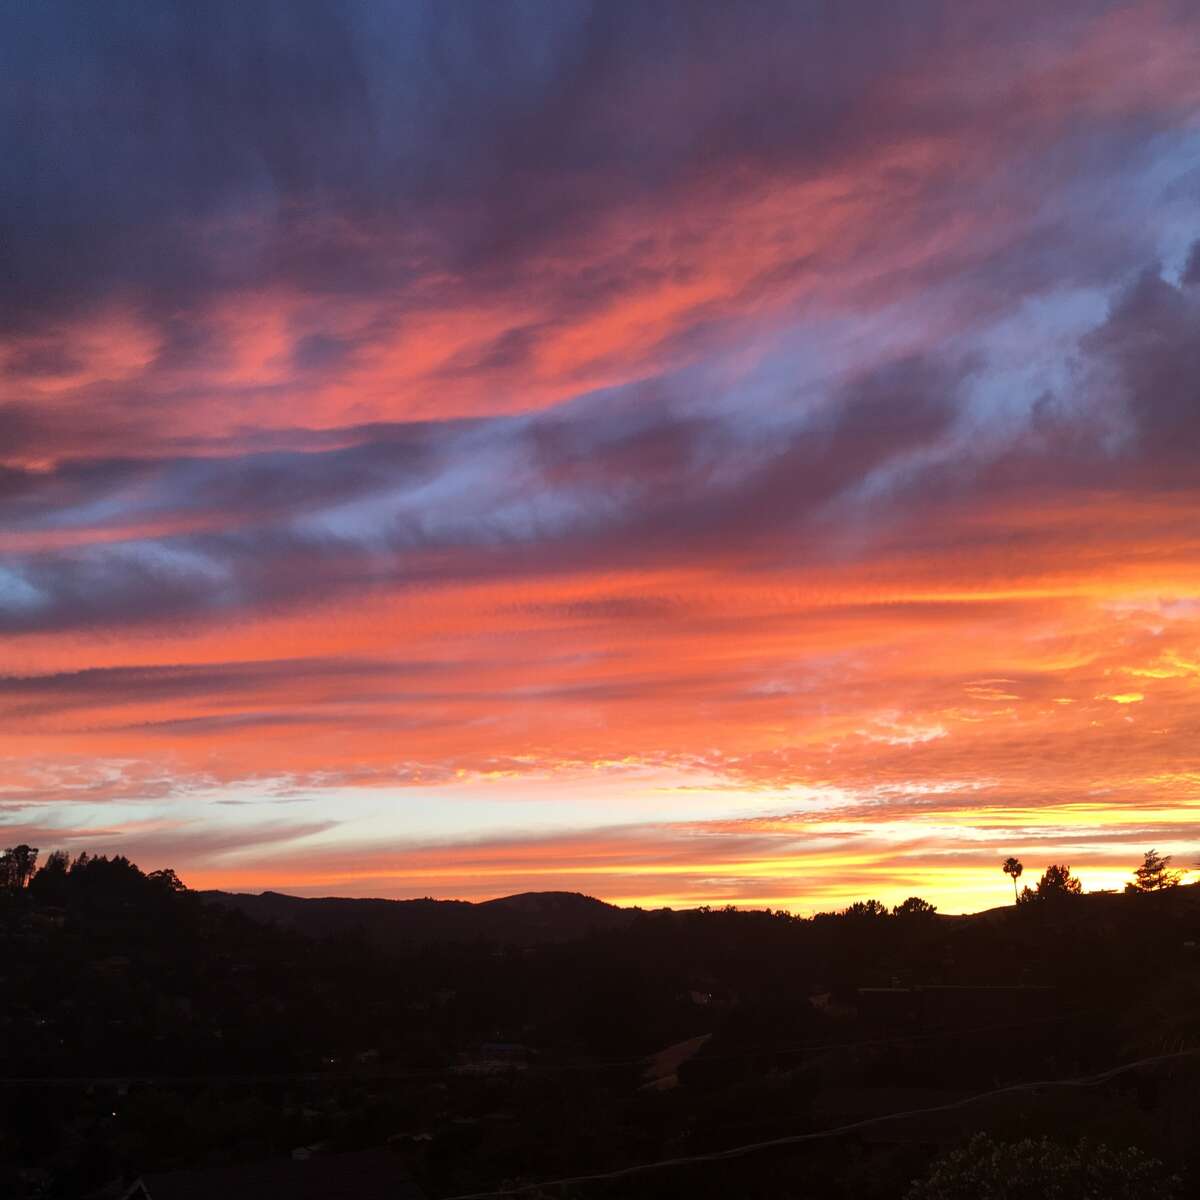 Bay Area Instagrammers lose their minds over first sunset of summer